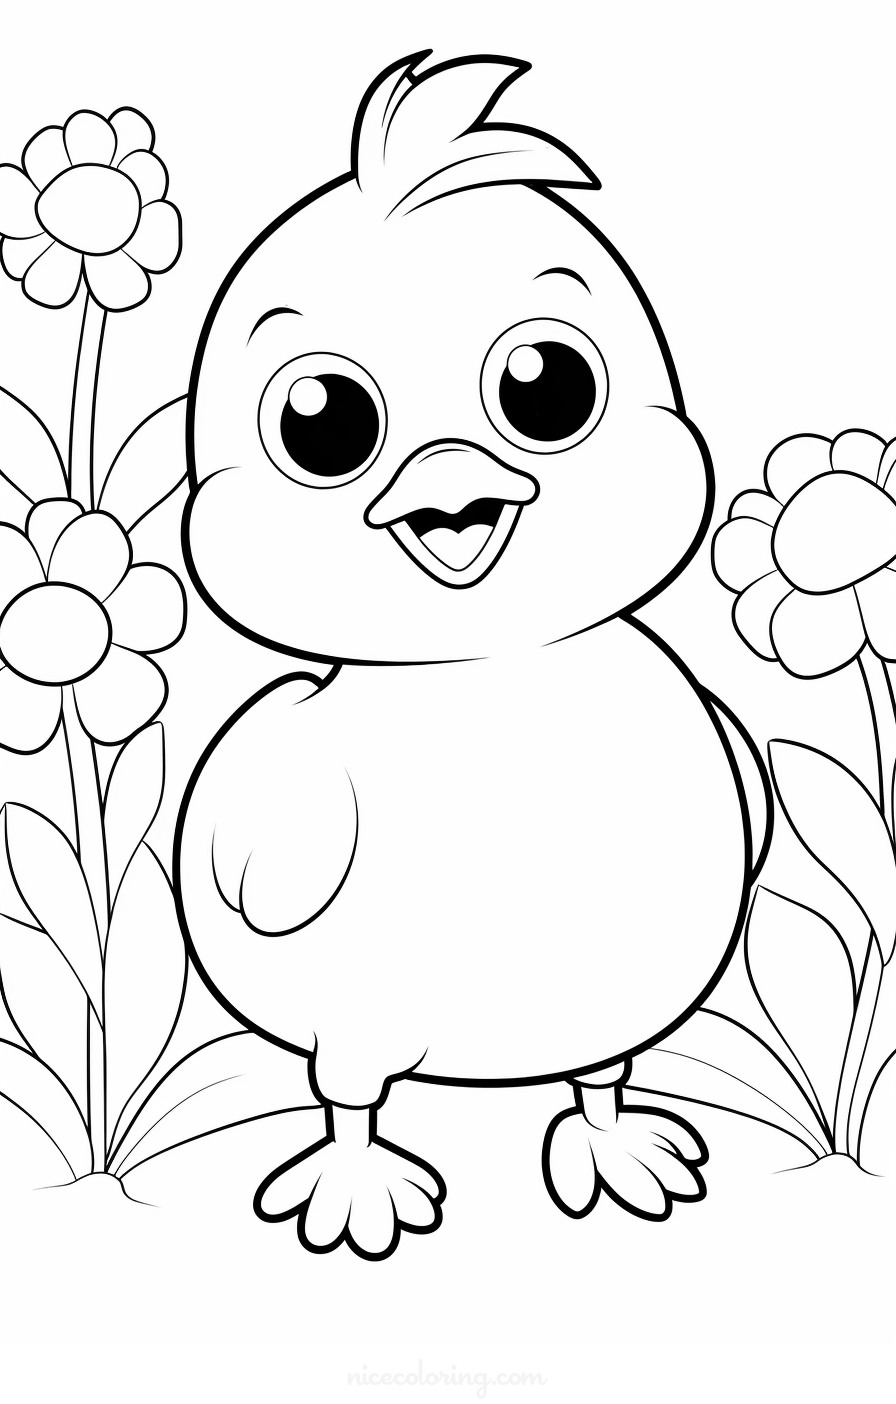 A serene bird perched on a branch, ready for coloring